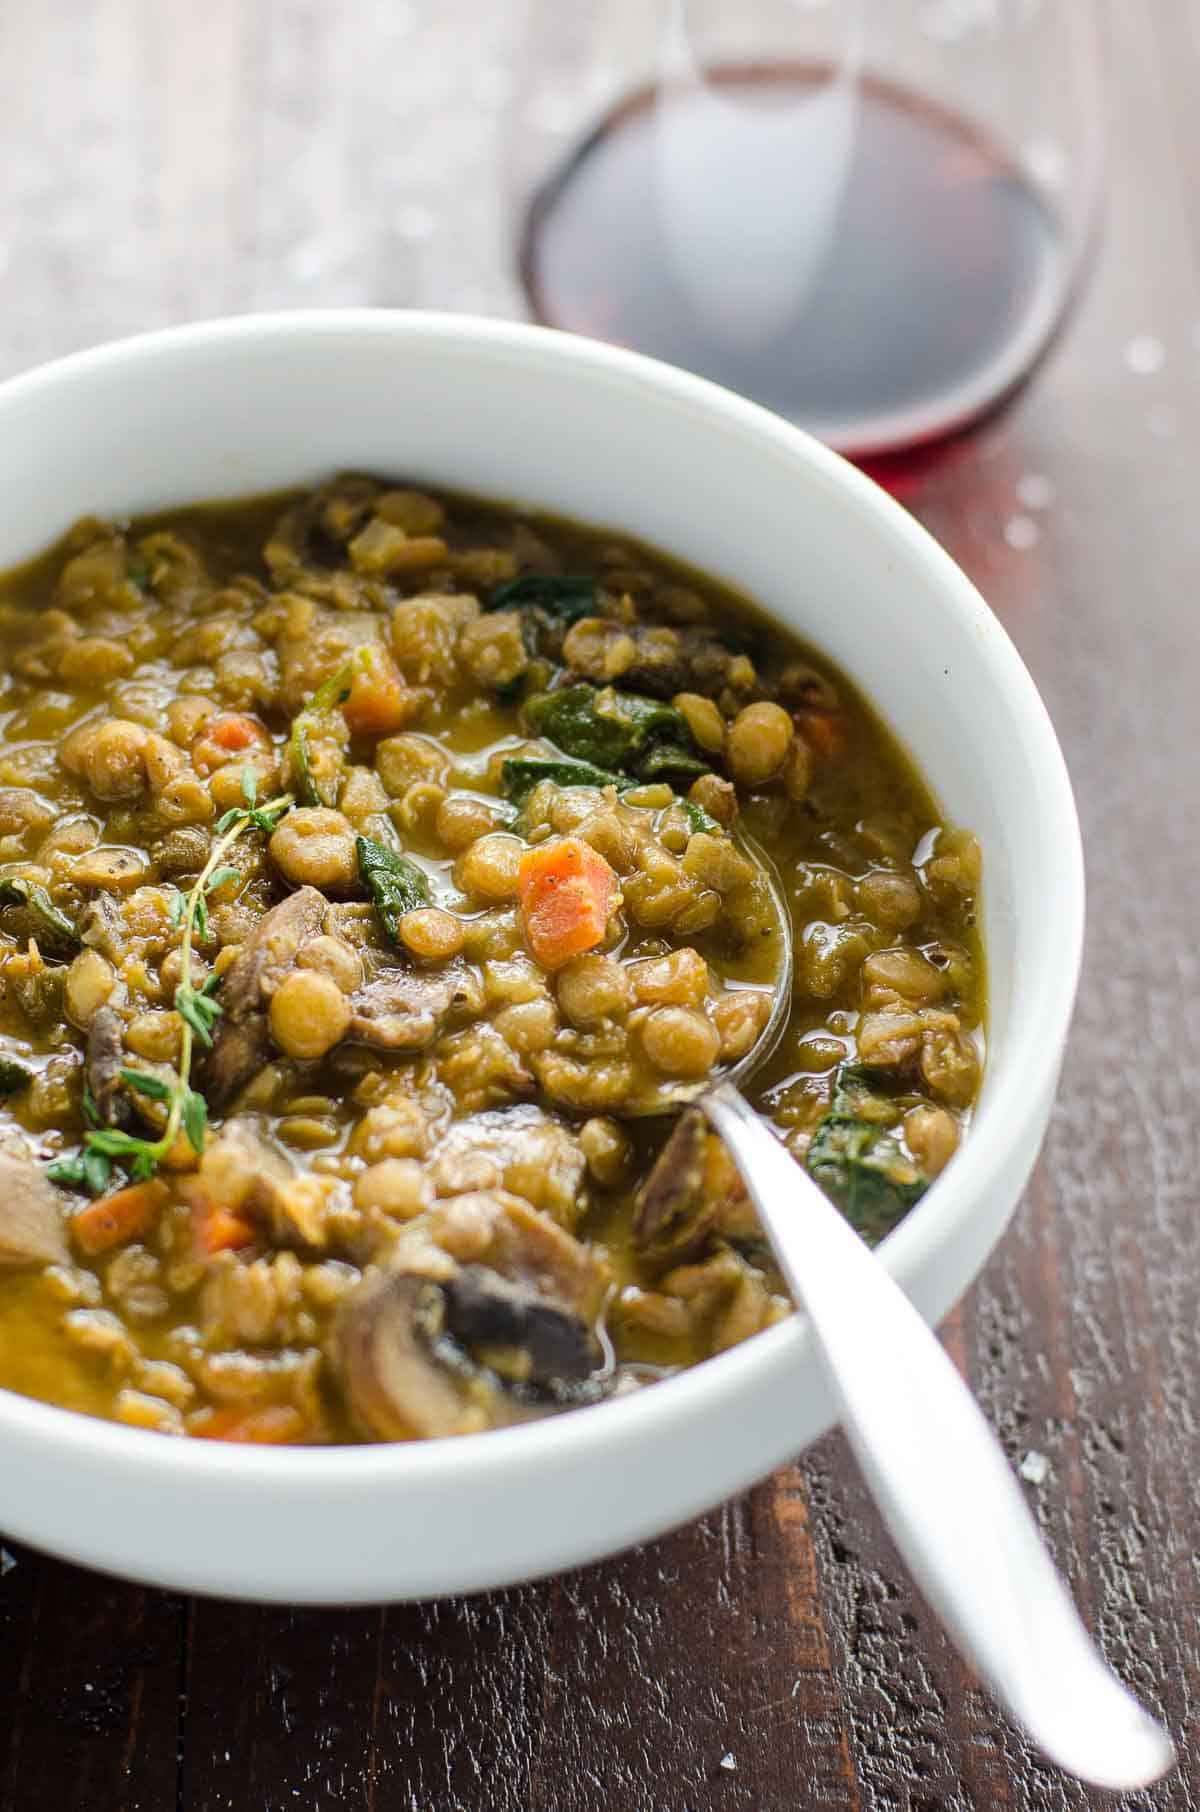 mushroom lentil stew with spinach in a bowl with a spoon and a glass of red wine